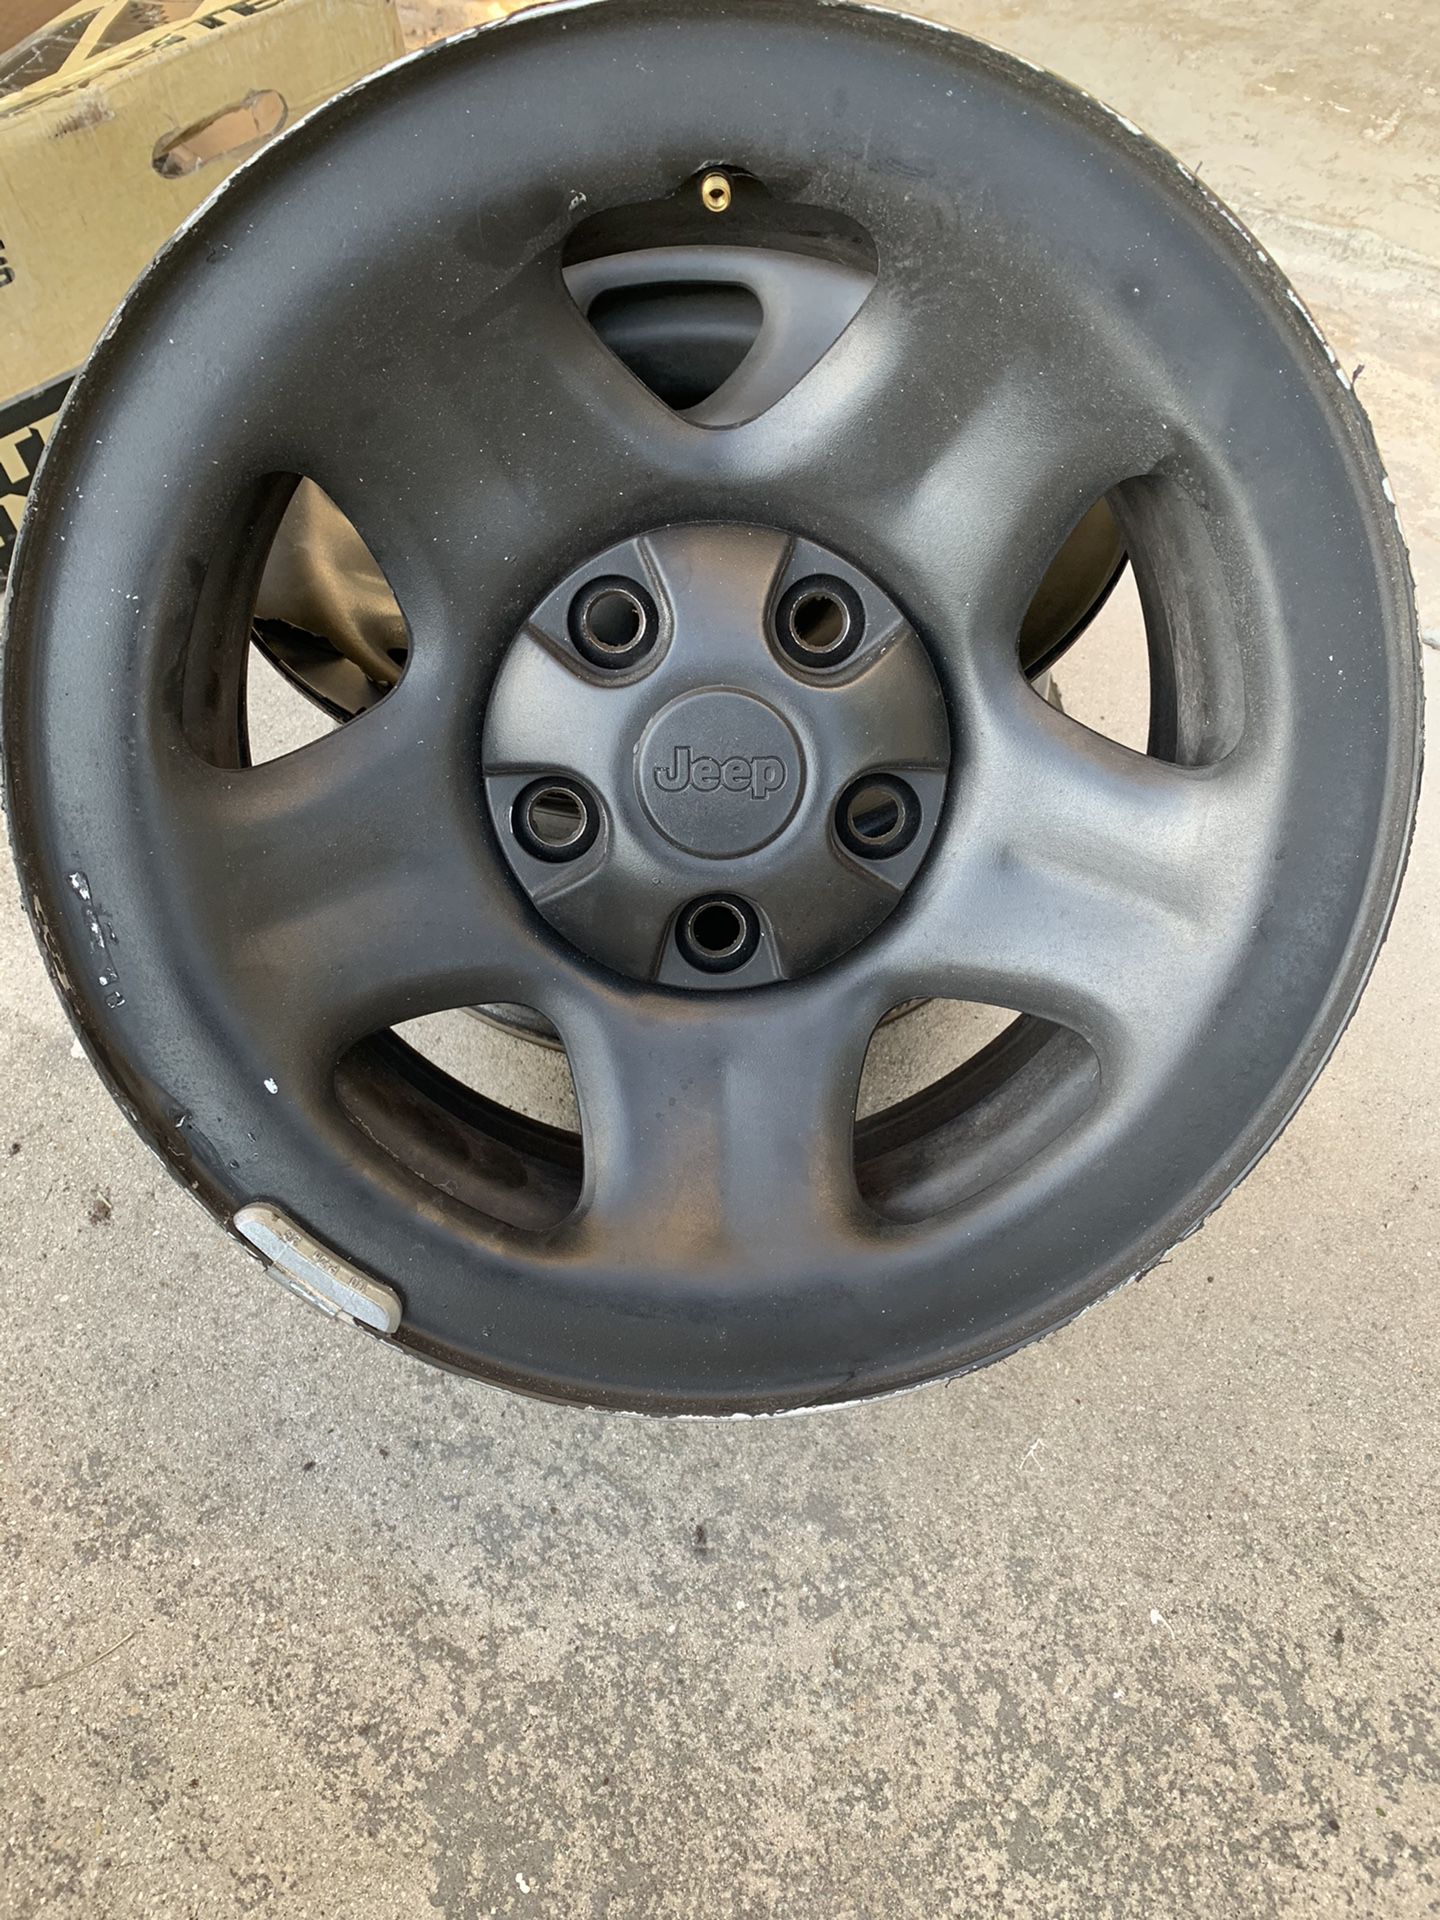 Jeep OEM wheels with caps set of four